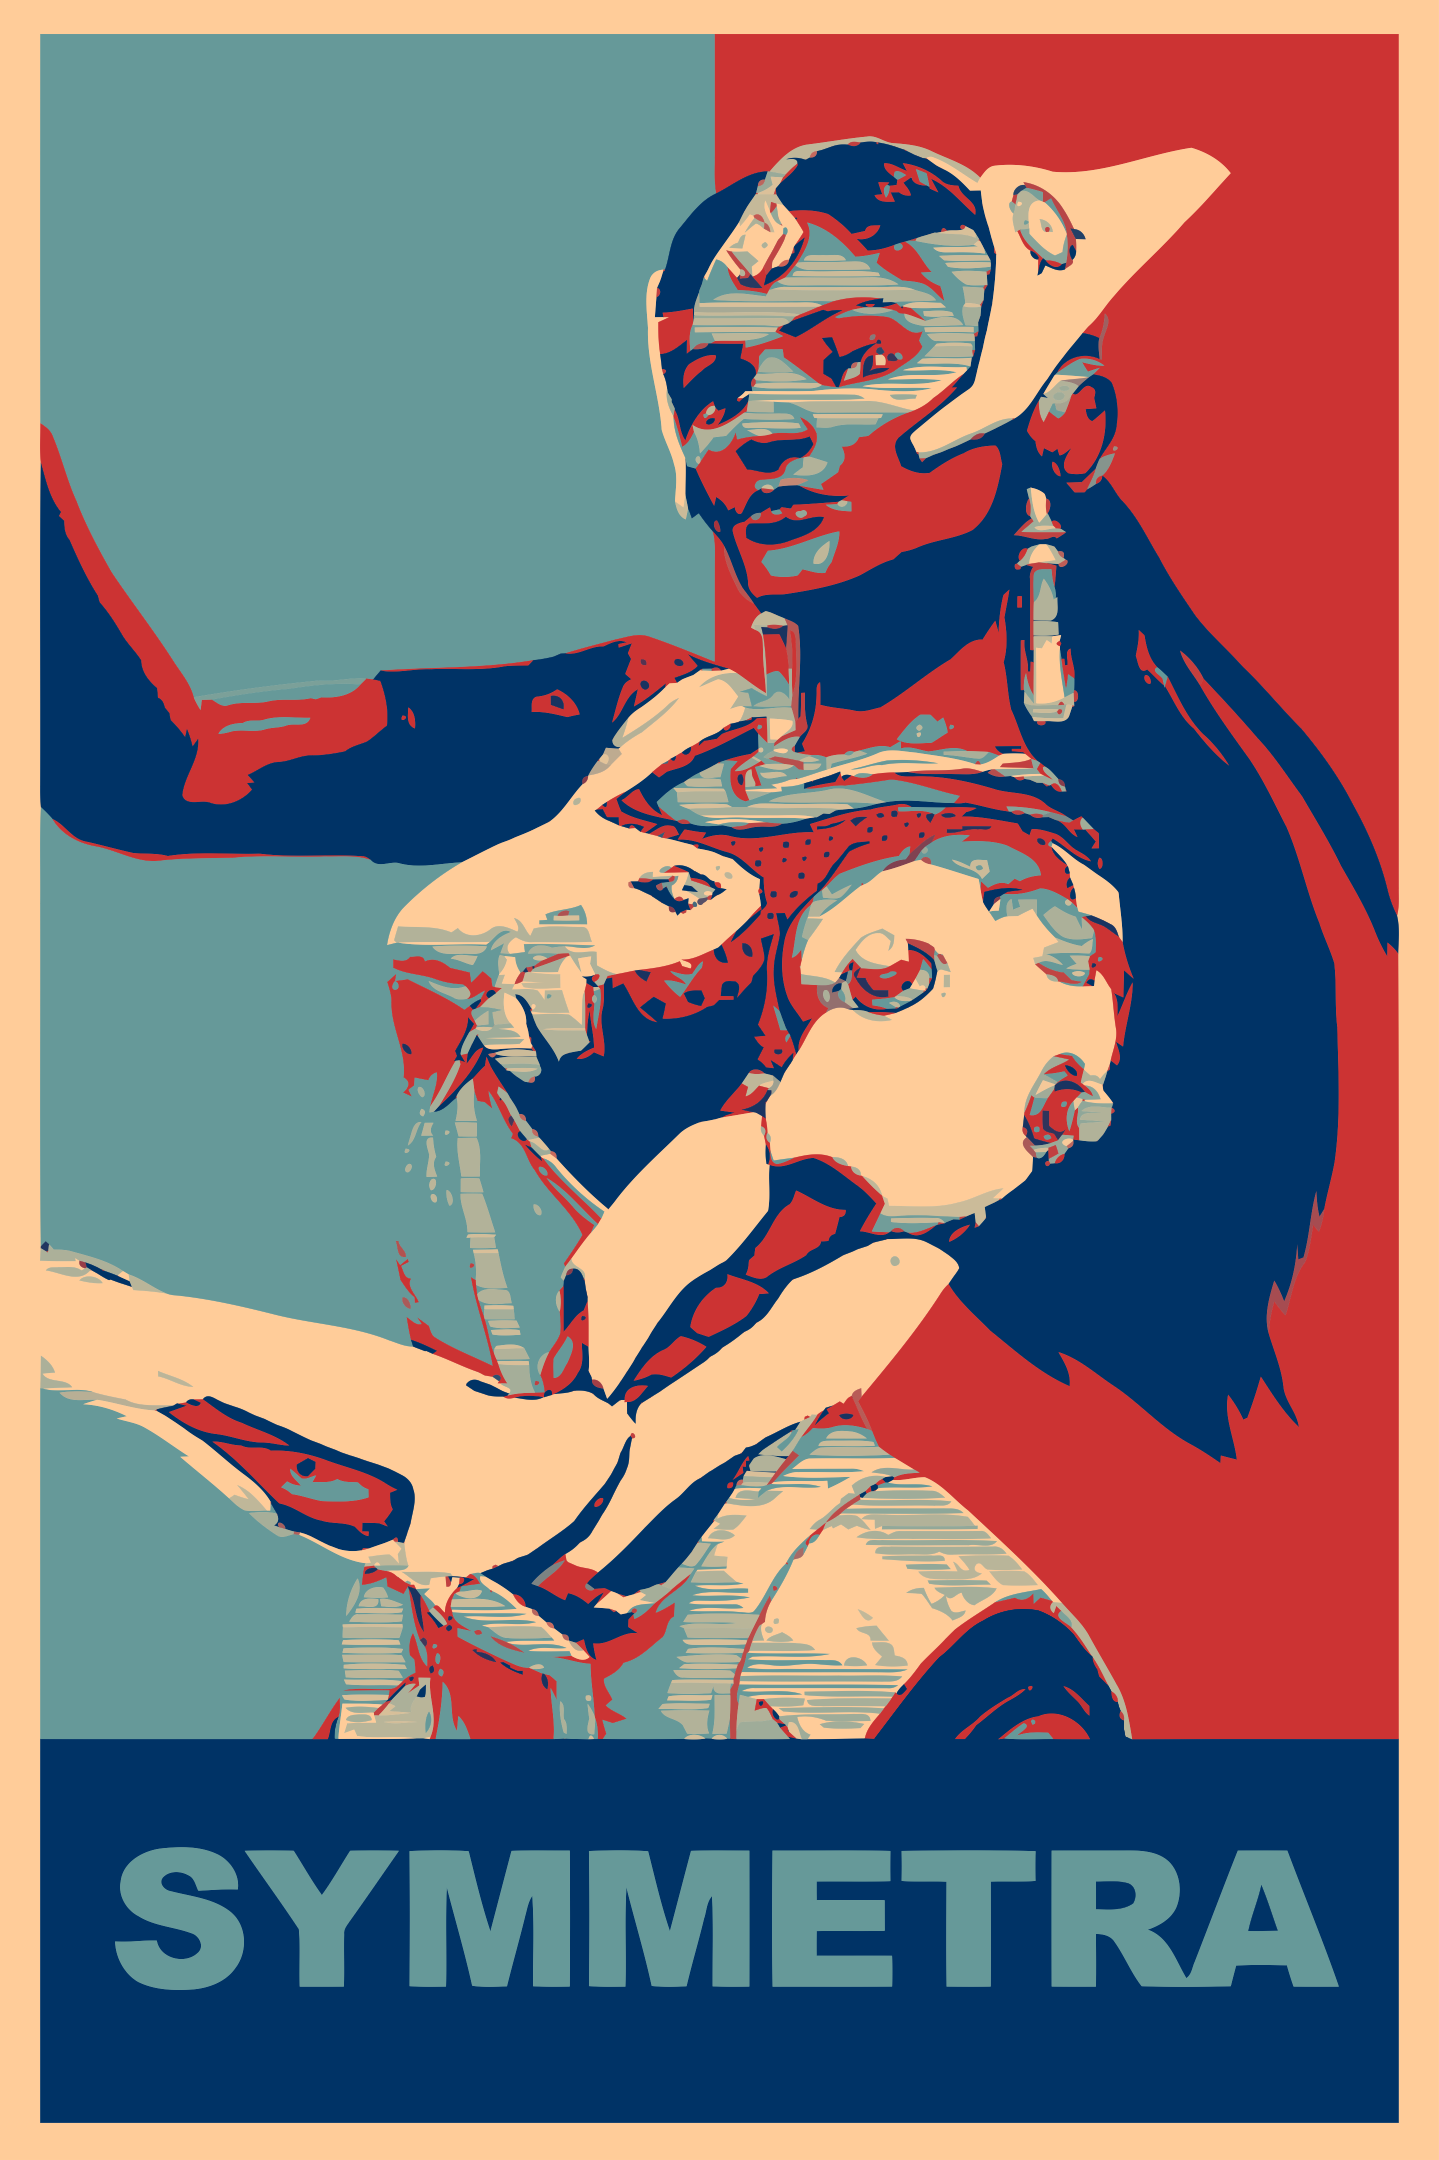 General 1439x2160 propaganda Symmetra (Overwatch) Overwatch video game characters video games Hope posters